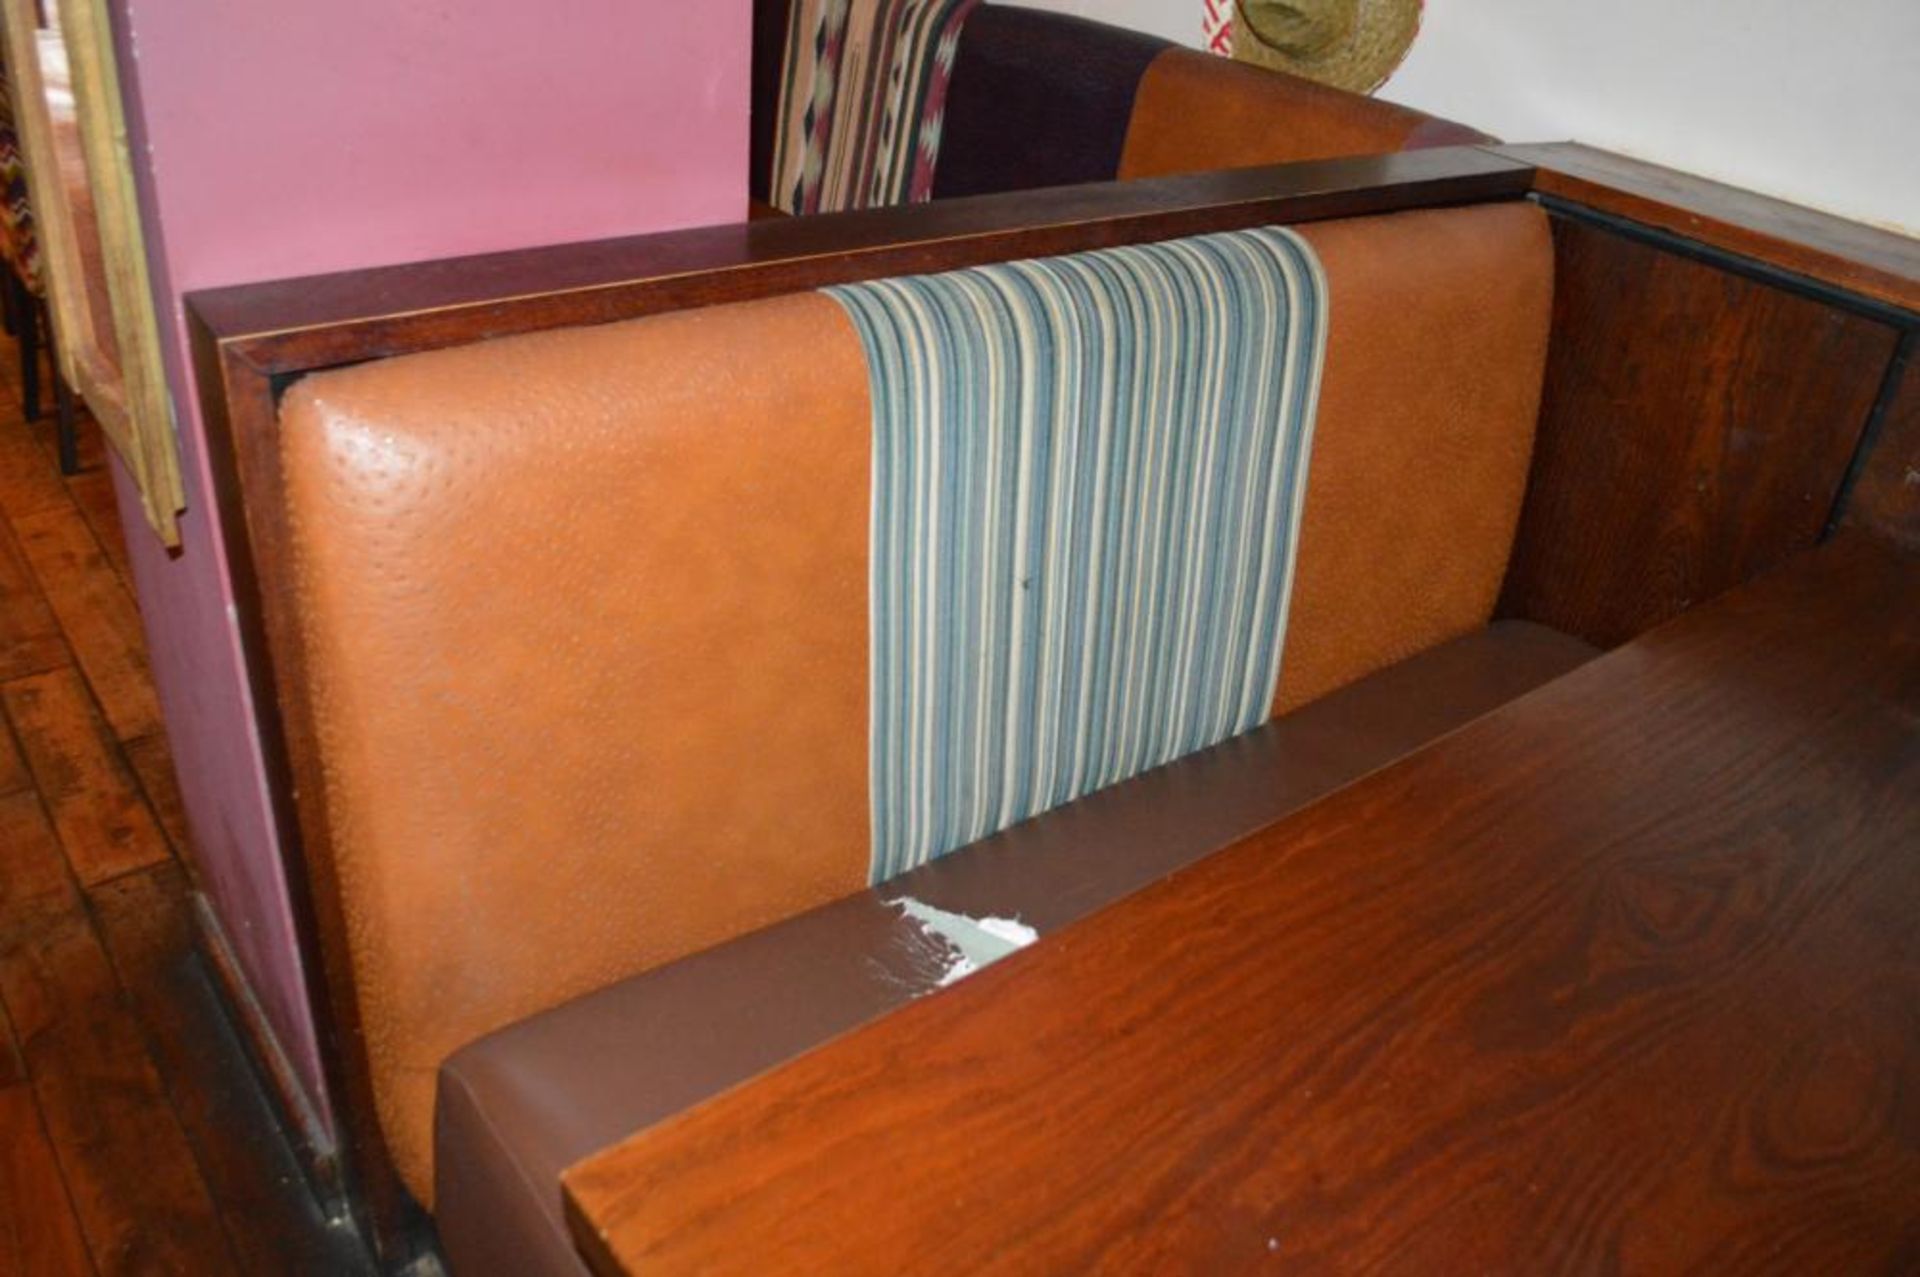 3 x Assorted Pieces Of Upholsted Restaurant Booth Seating - CL367 - Ref CQ-FB207 - Location: Manches - Image 5 of 7